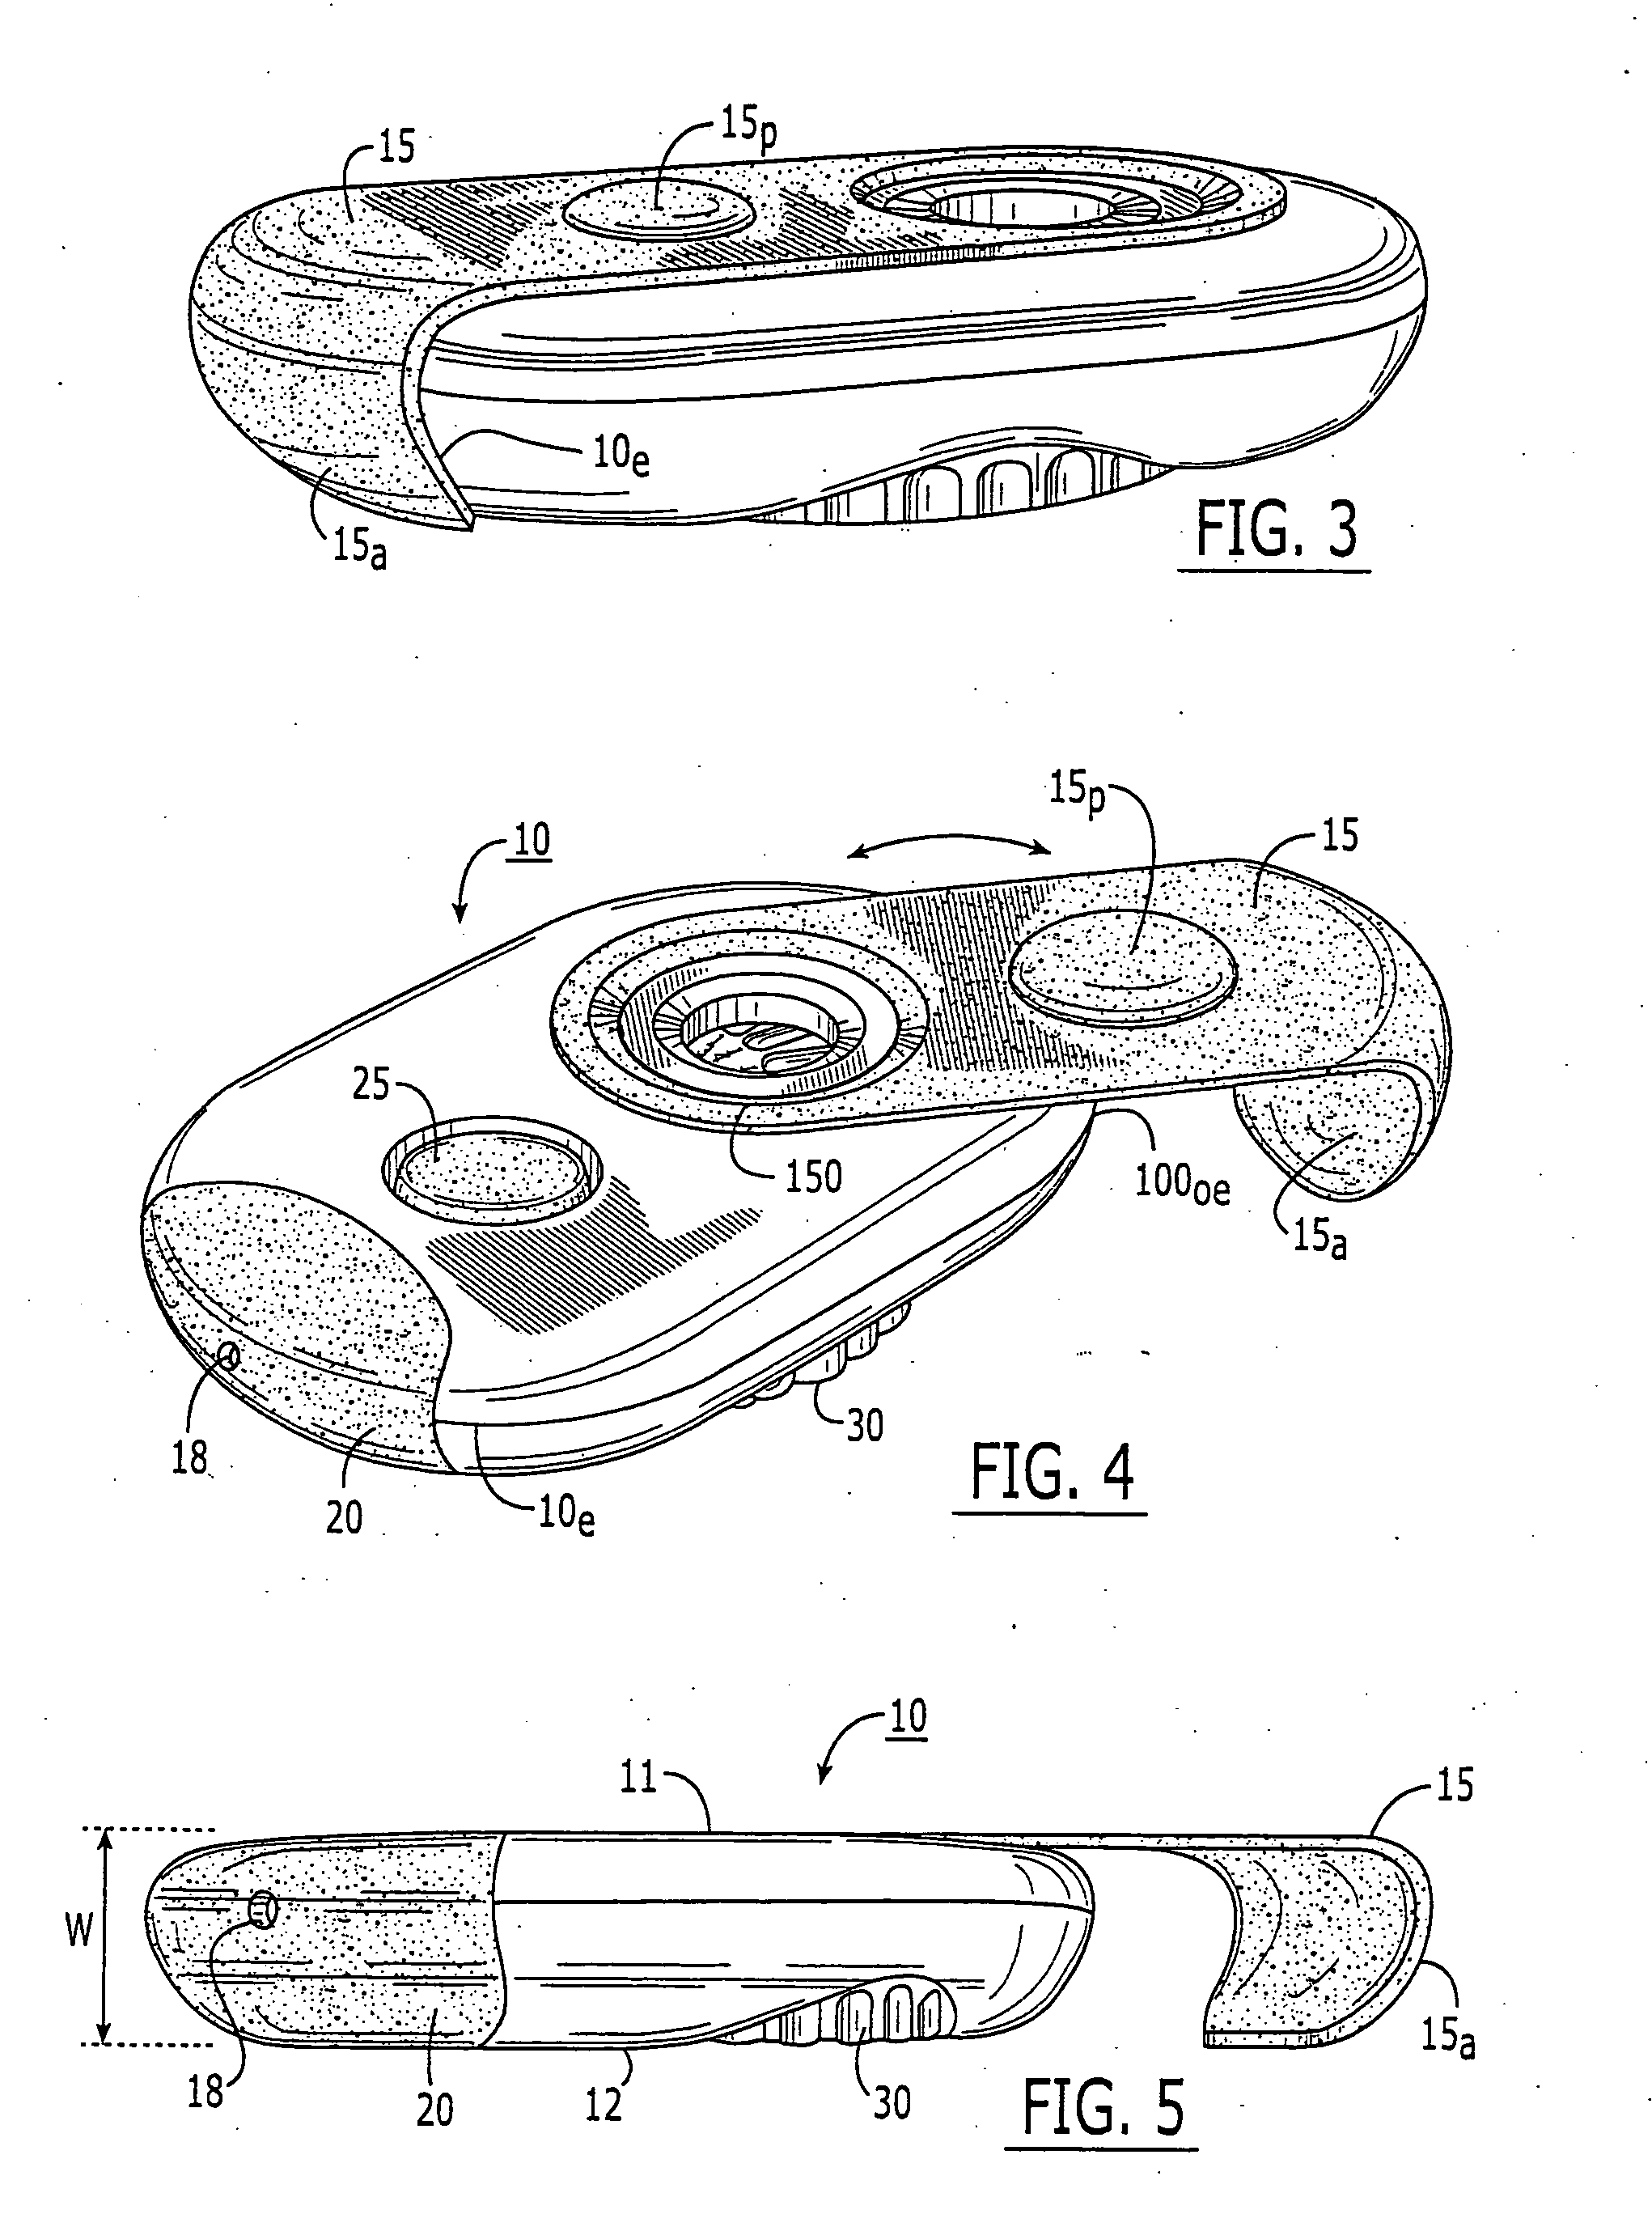 Dry powder inhalers, related blister devices, and associated methods of dispensing dry powder substances and fabricating blister packages